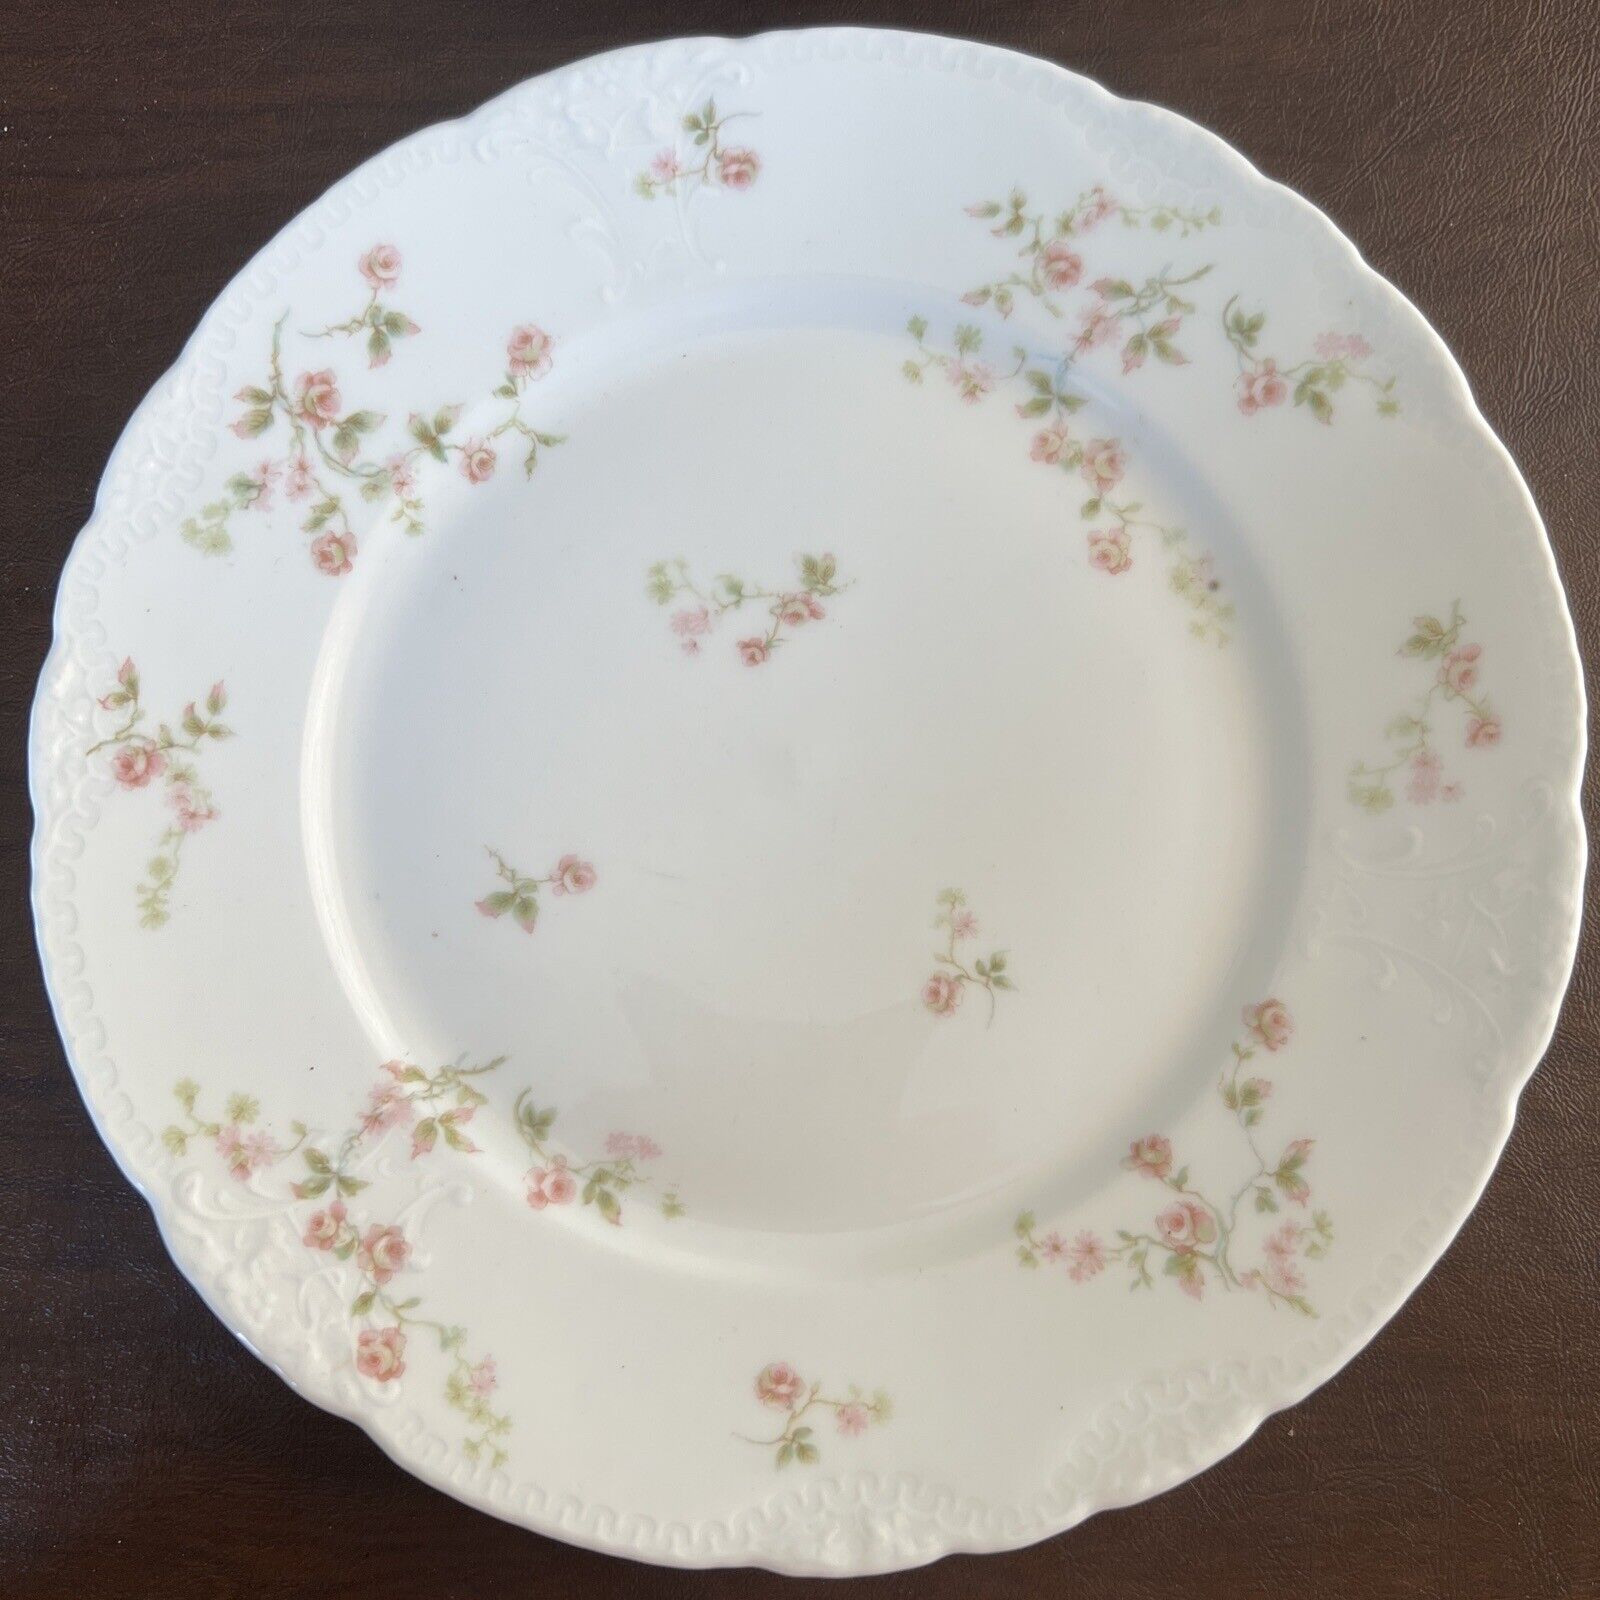 Limoges TH Pink Roses, Harrison Rose? Dinner Plate 9.75” Beautiful